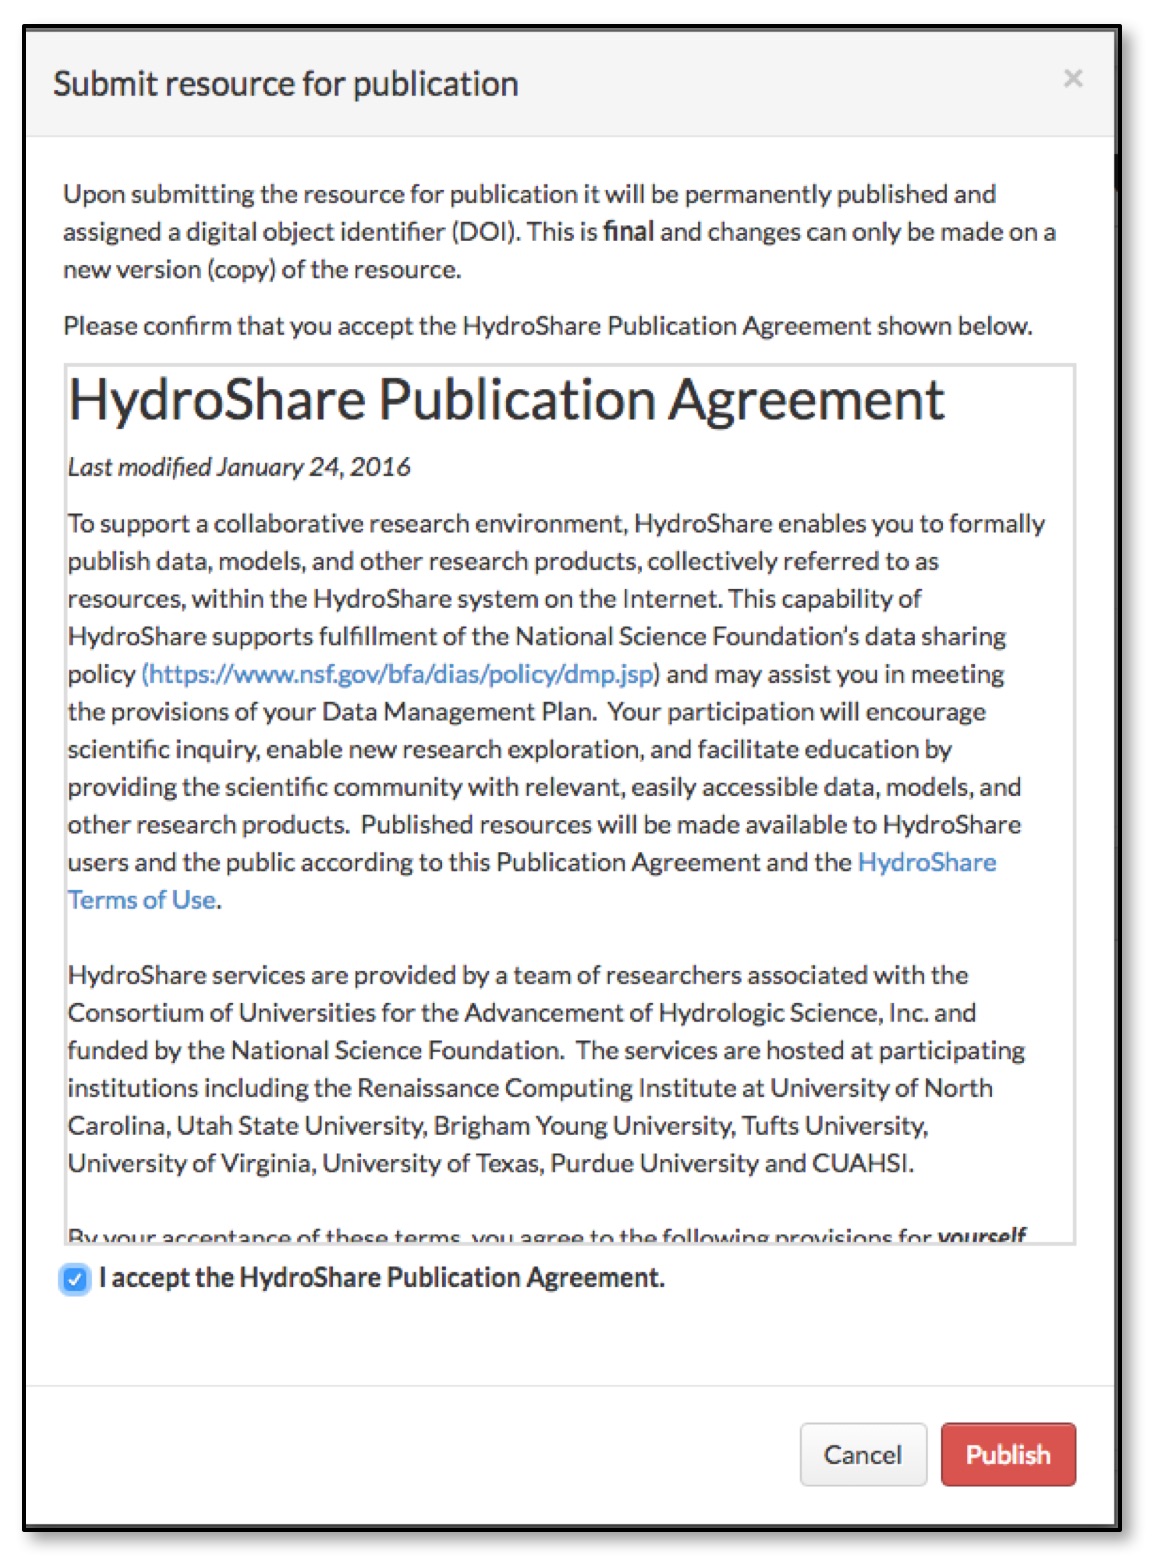 A pop up of the HydroShare Publication Agreement